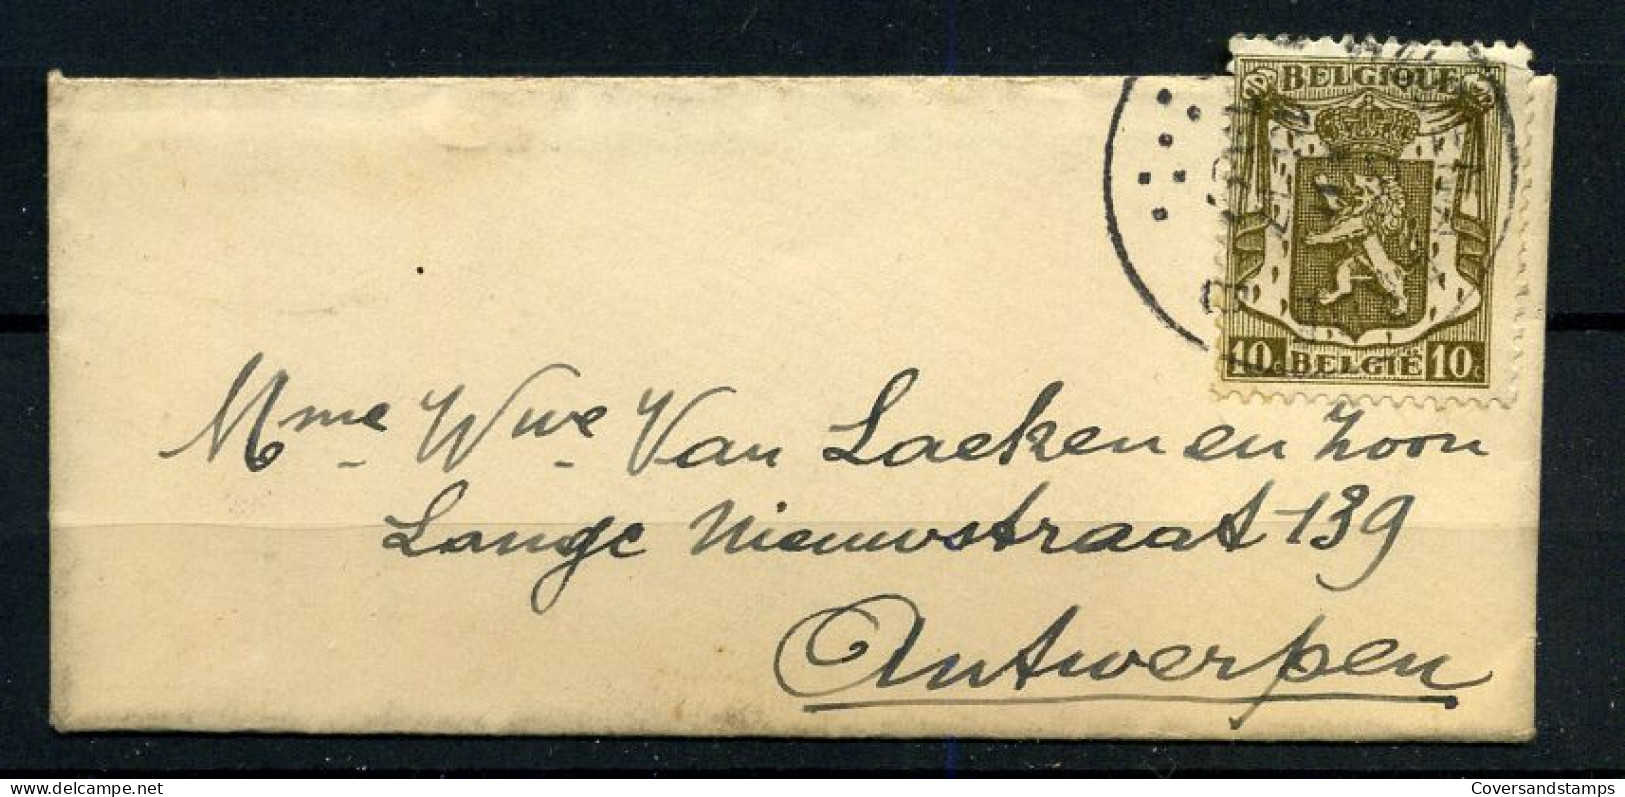 Cover Naar Antwerpen - 1935-1949 Small Seal Of The State